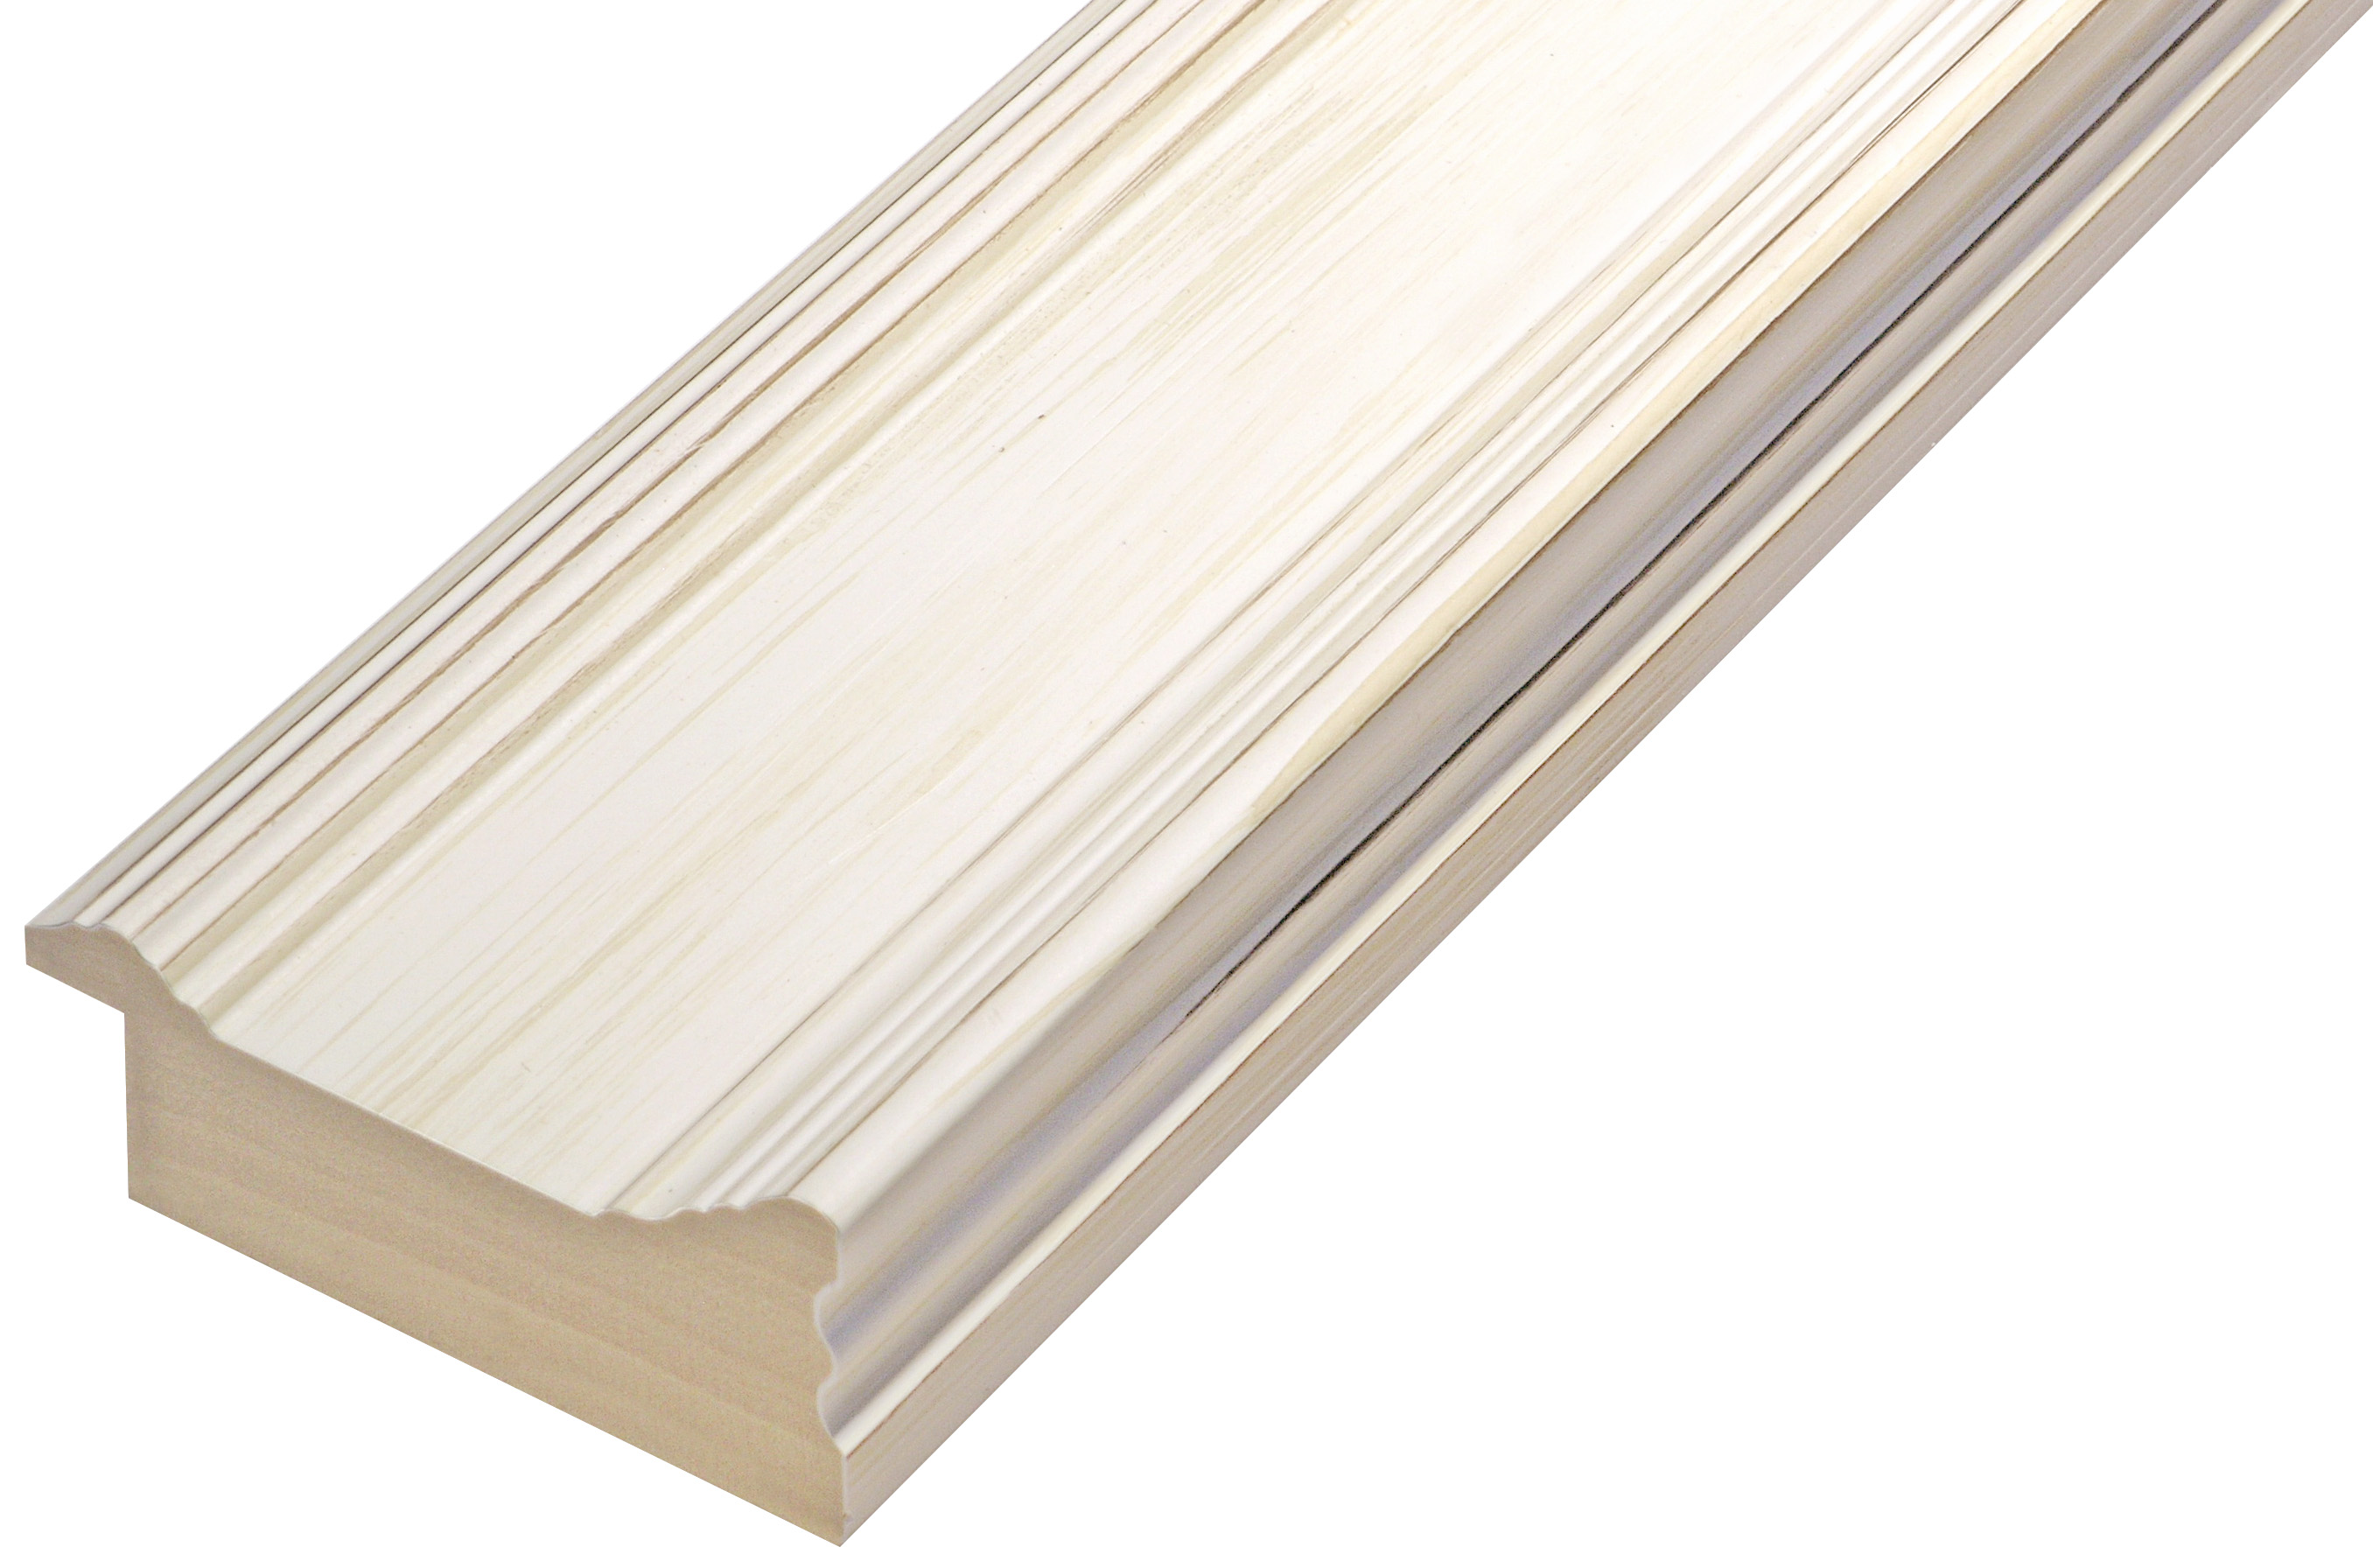 Moulding ayous jointed width 68mm height 30 - Cream finish - 573CREMA